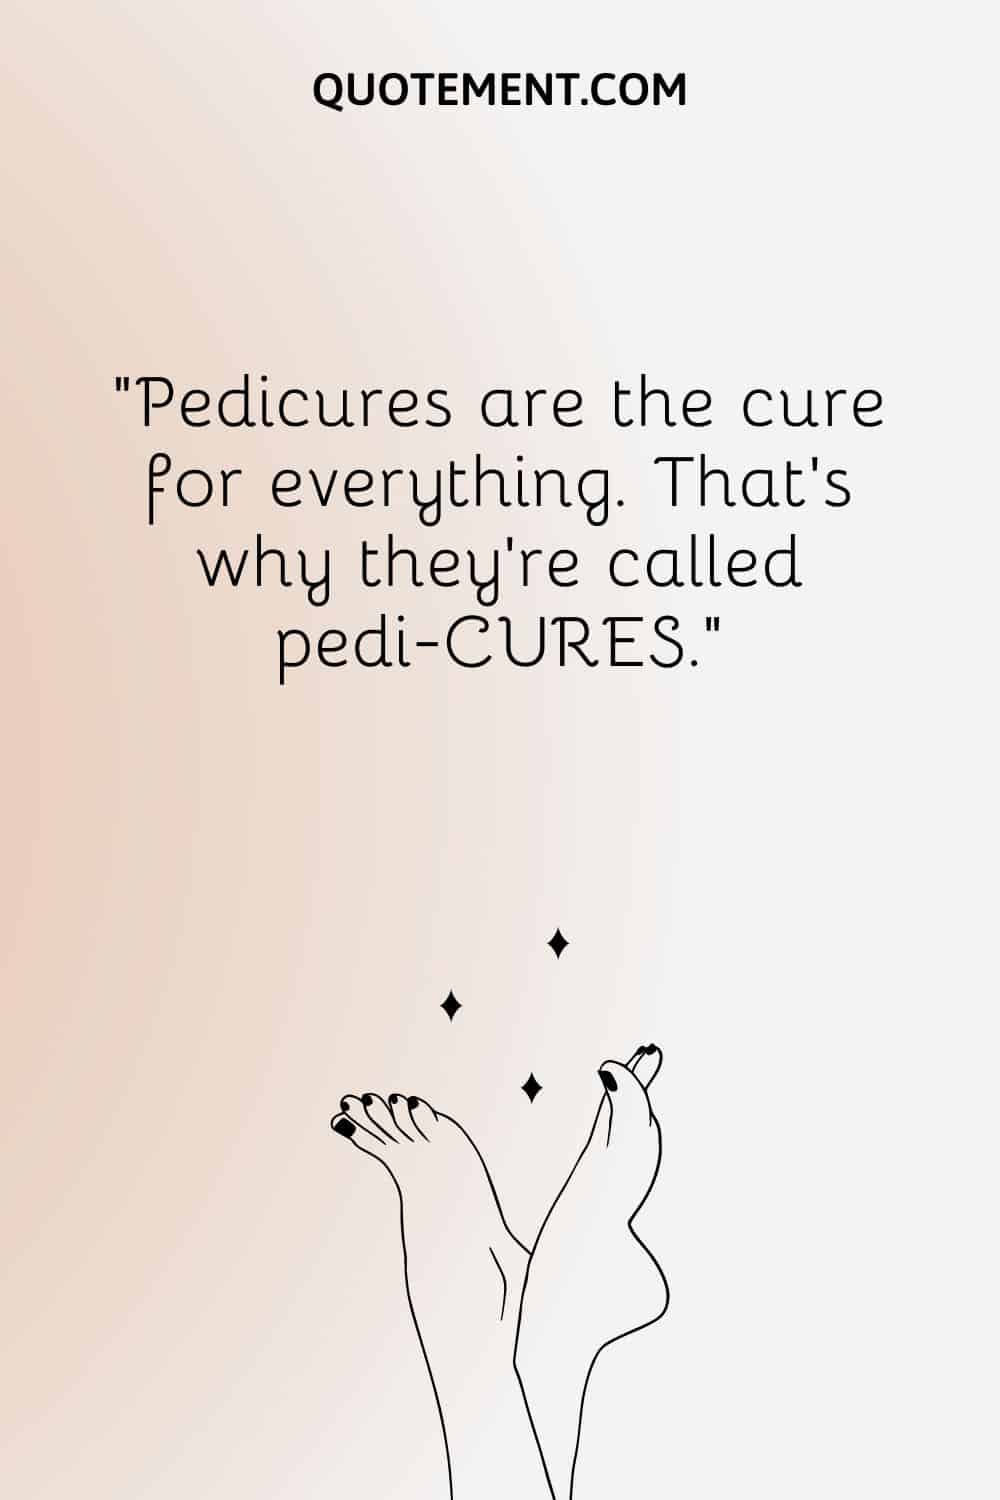 Pedicures are the cure for everything. That’s why they’re called pedi-CURES.